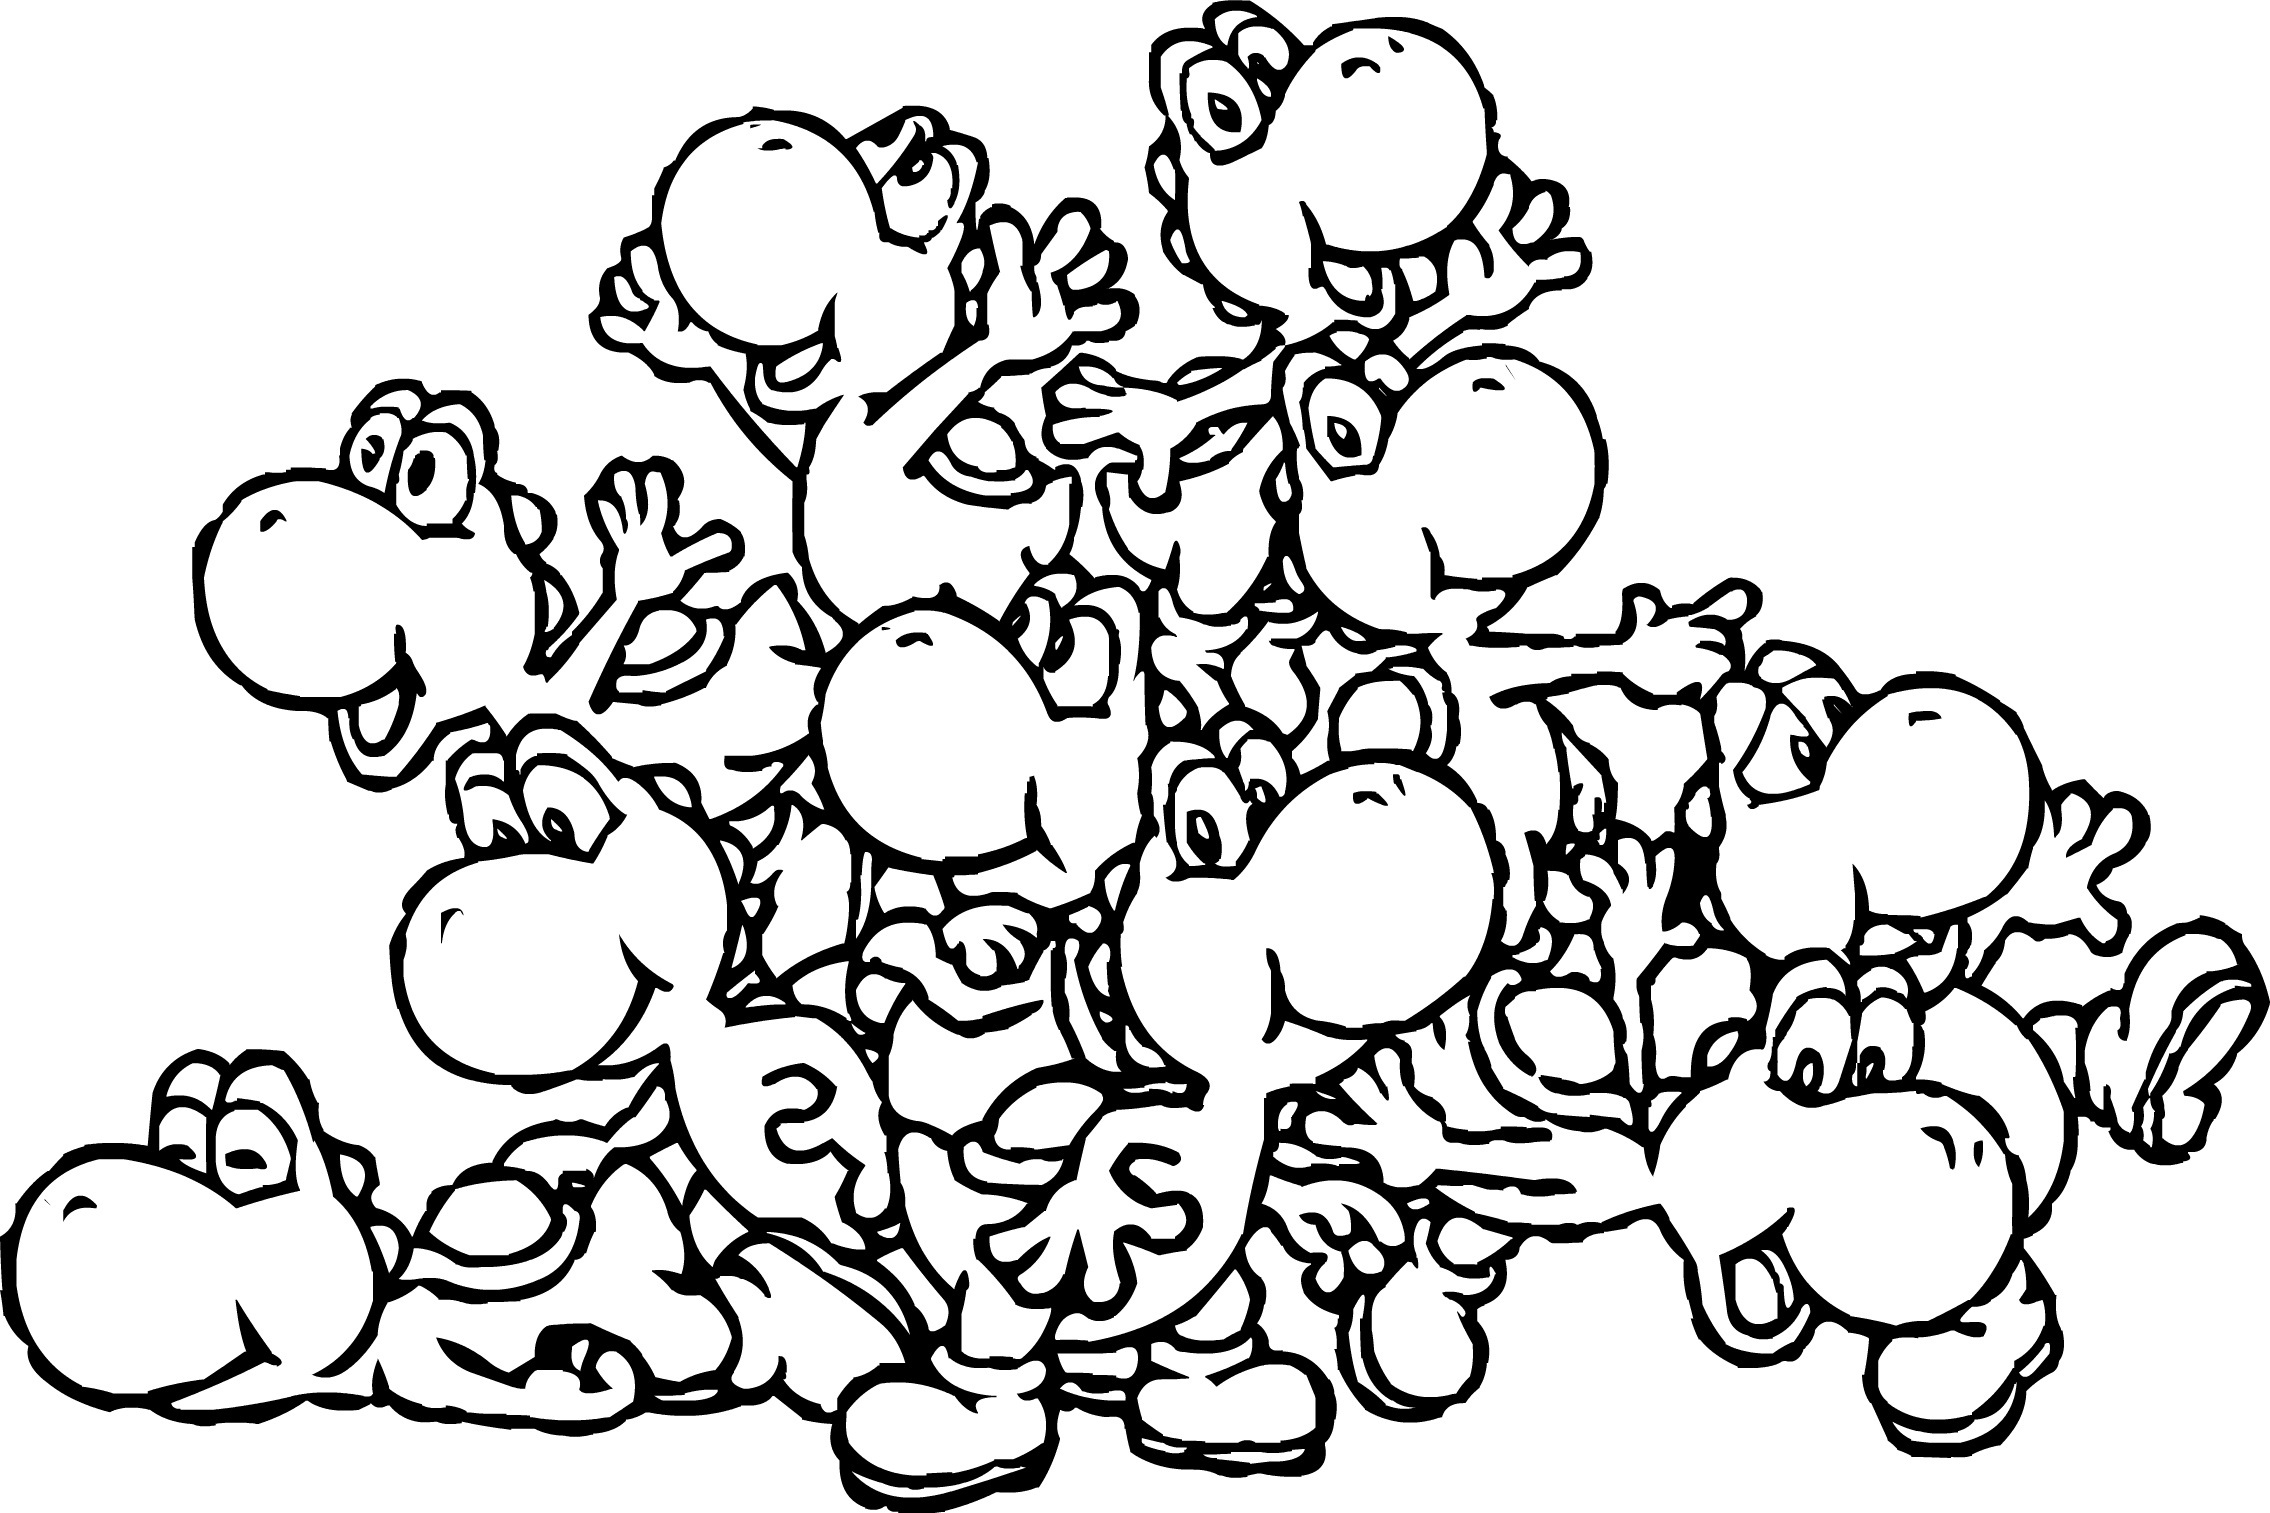 yoshi coloring book pages - photo #22